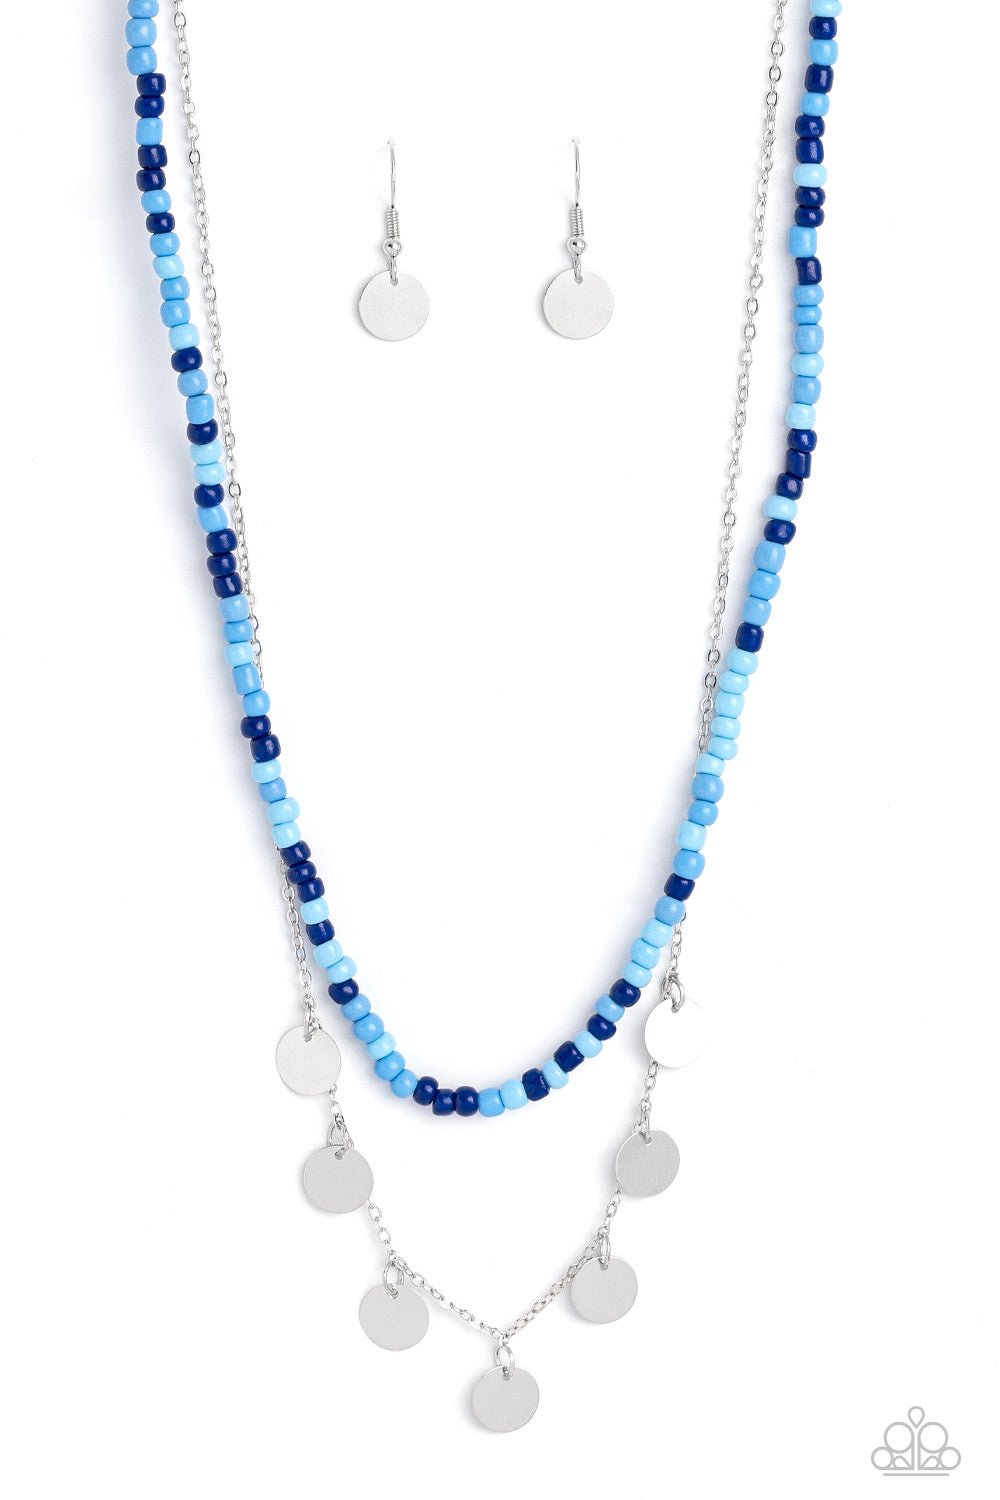 Comet Candy Blue Necklace - Jewelry by Bretta